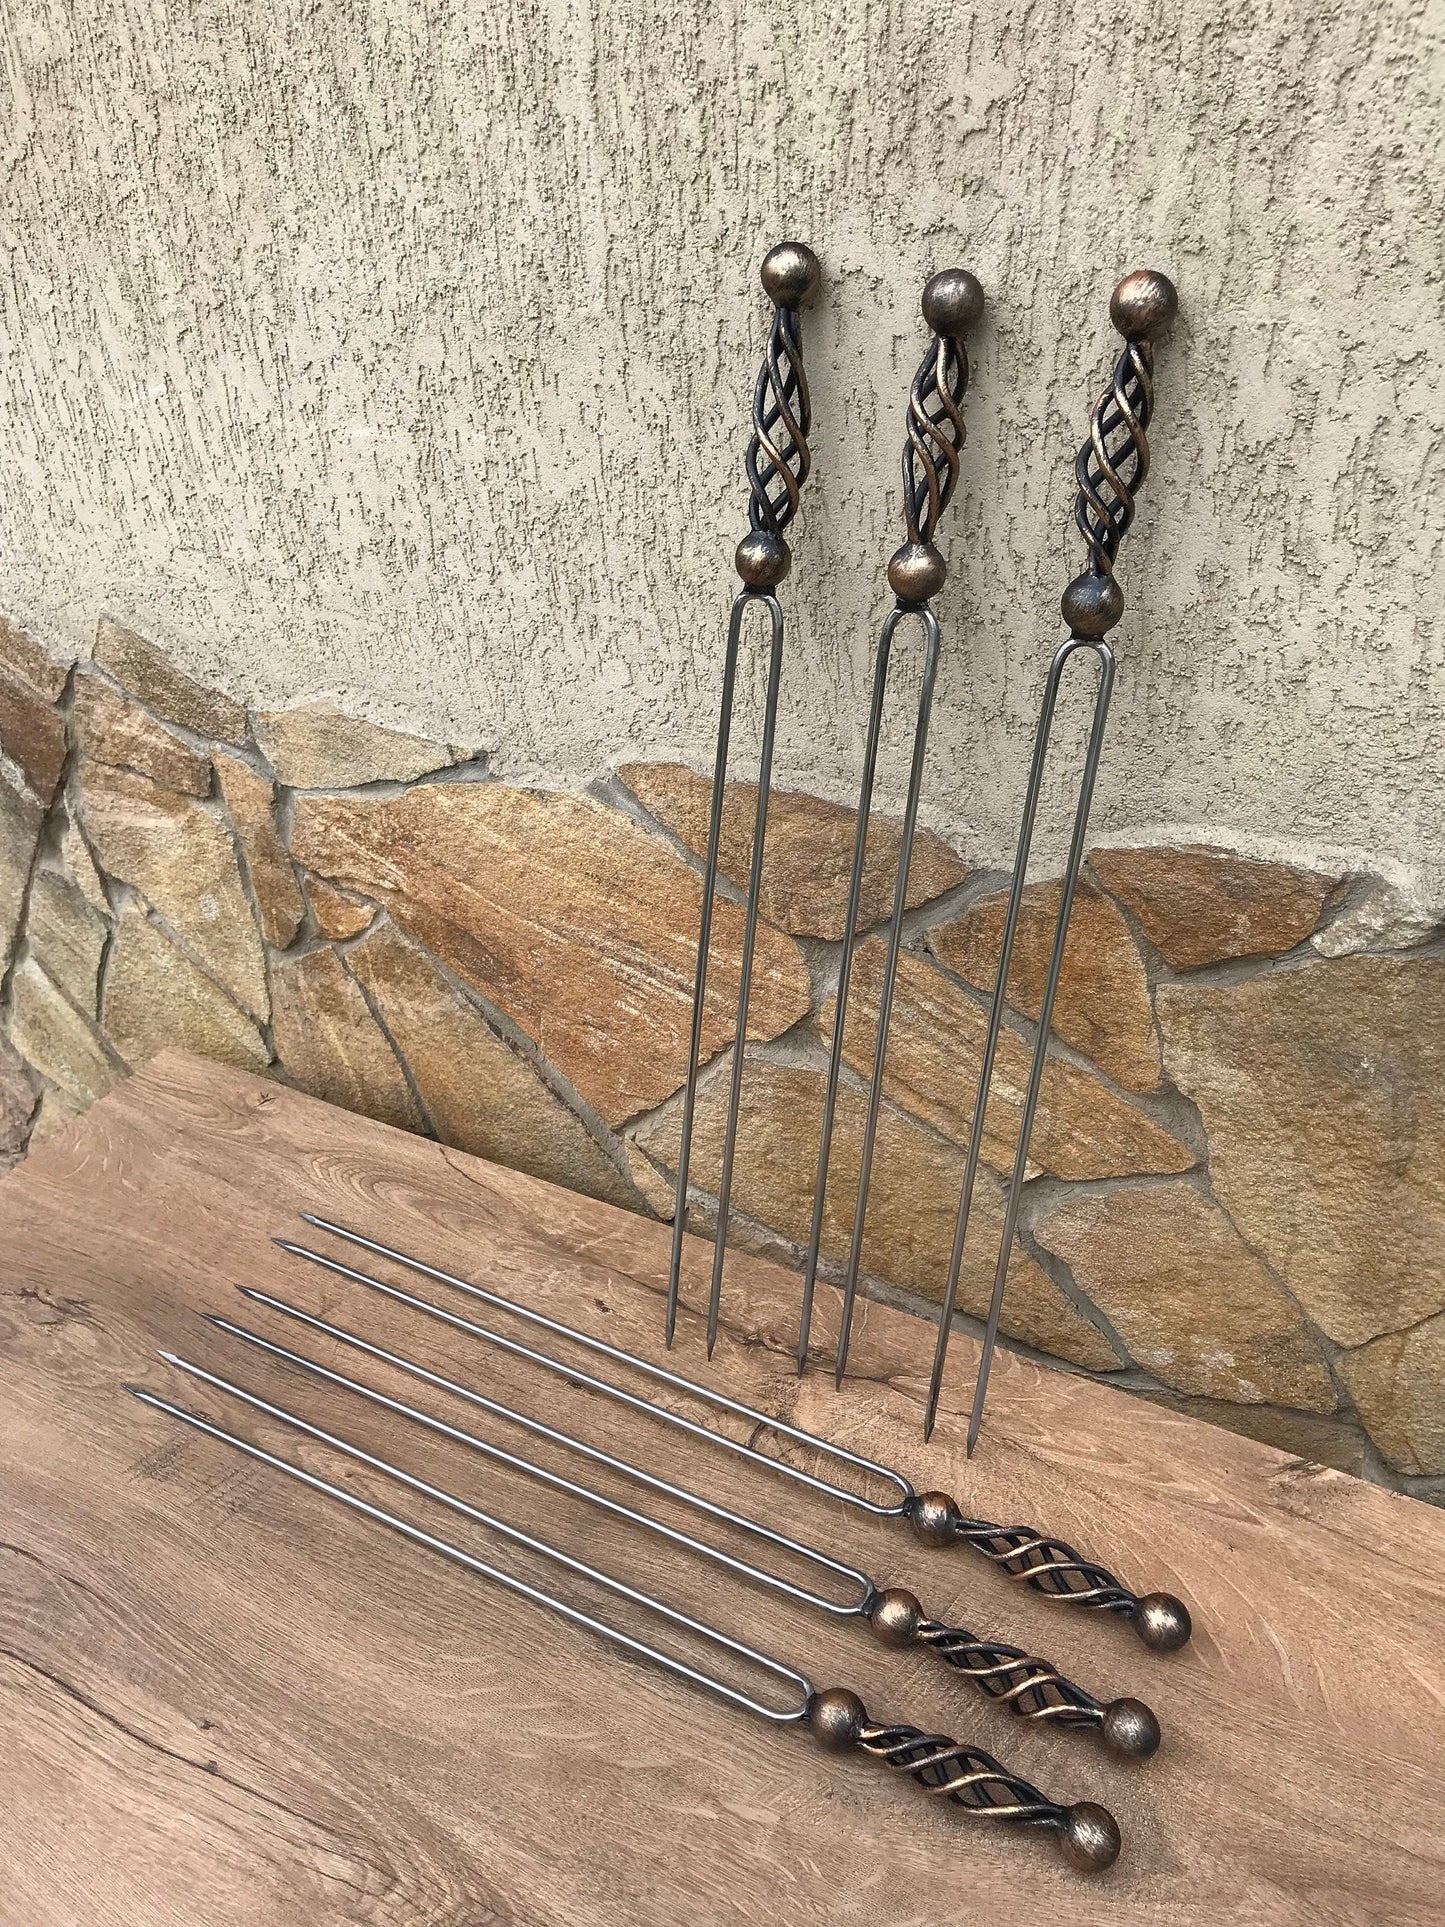 Forged skewers, metal skewers, iron gifts, grill accessories, grilled meat, iron gift, barbecue, BBQ, family reunion, picnic, stainless